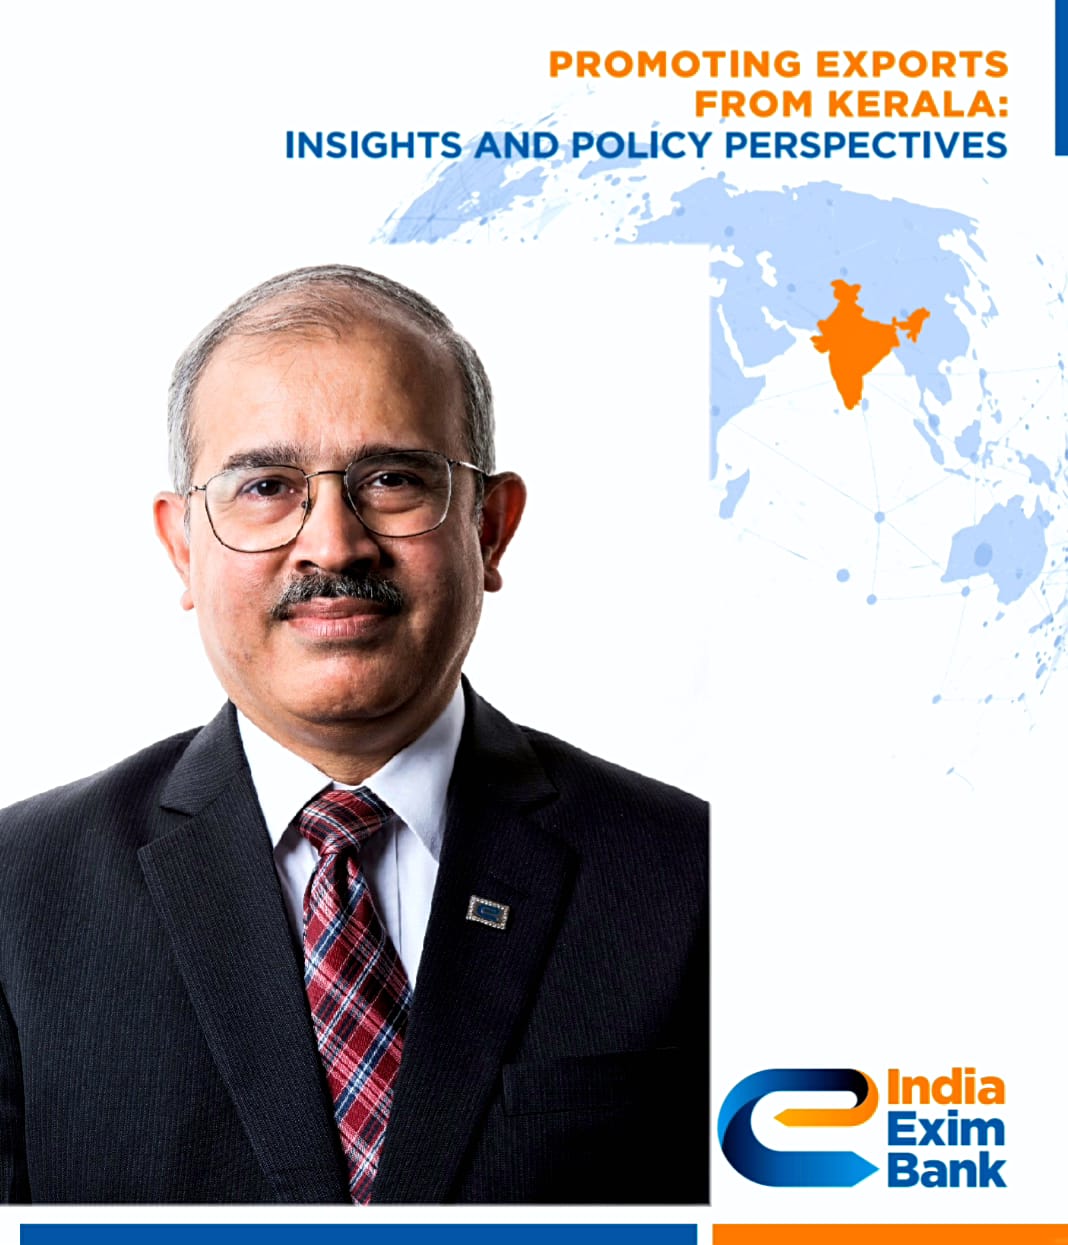  Mr. David Rasquinha, Managing Director, Exim Bank - Release Exim Bank (Study) Working Paper: ‘Promoting Exports from Kerala: Insights and Policy Perspectives’